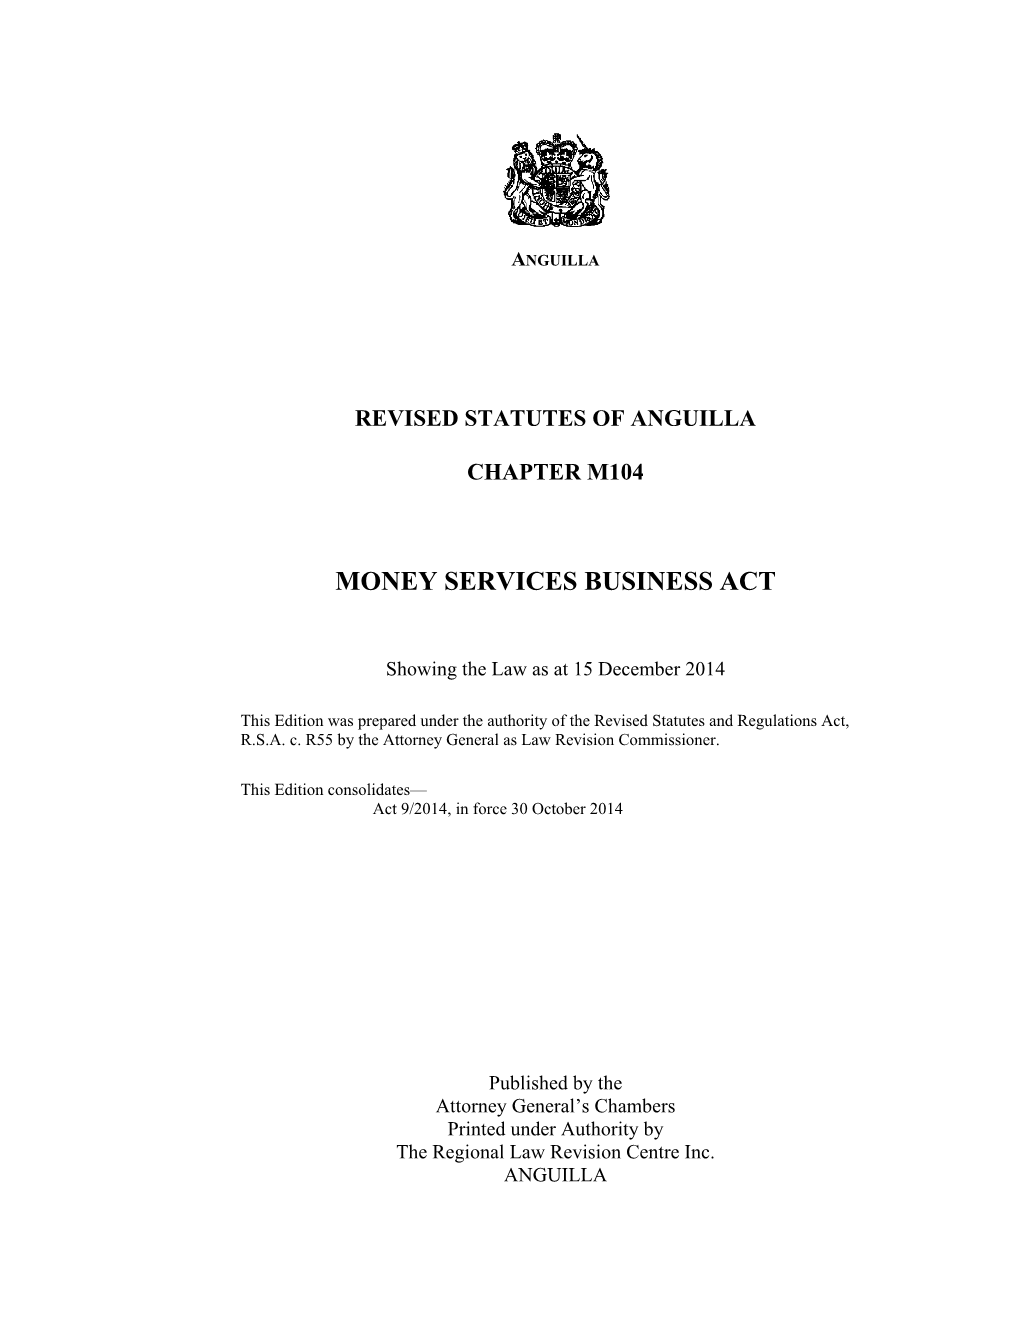 Money Services Business Act